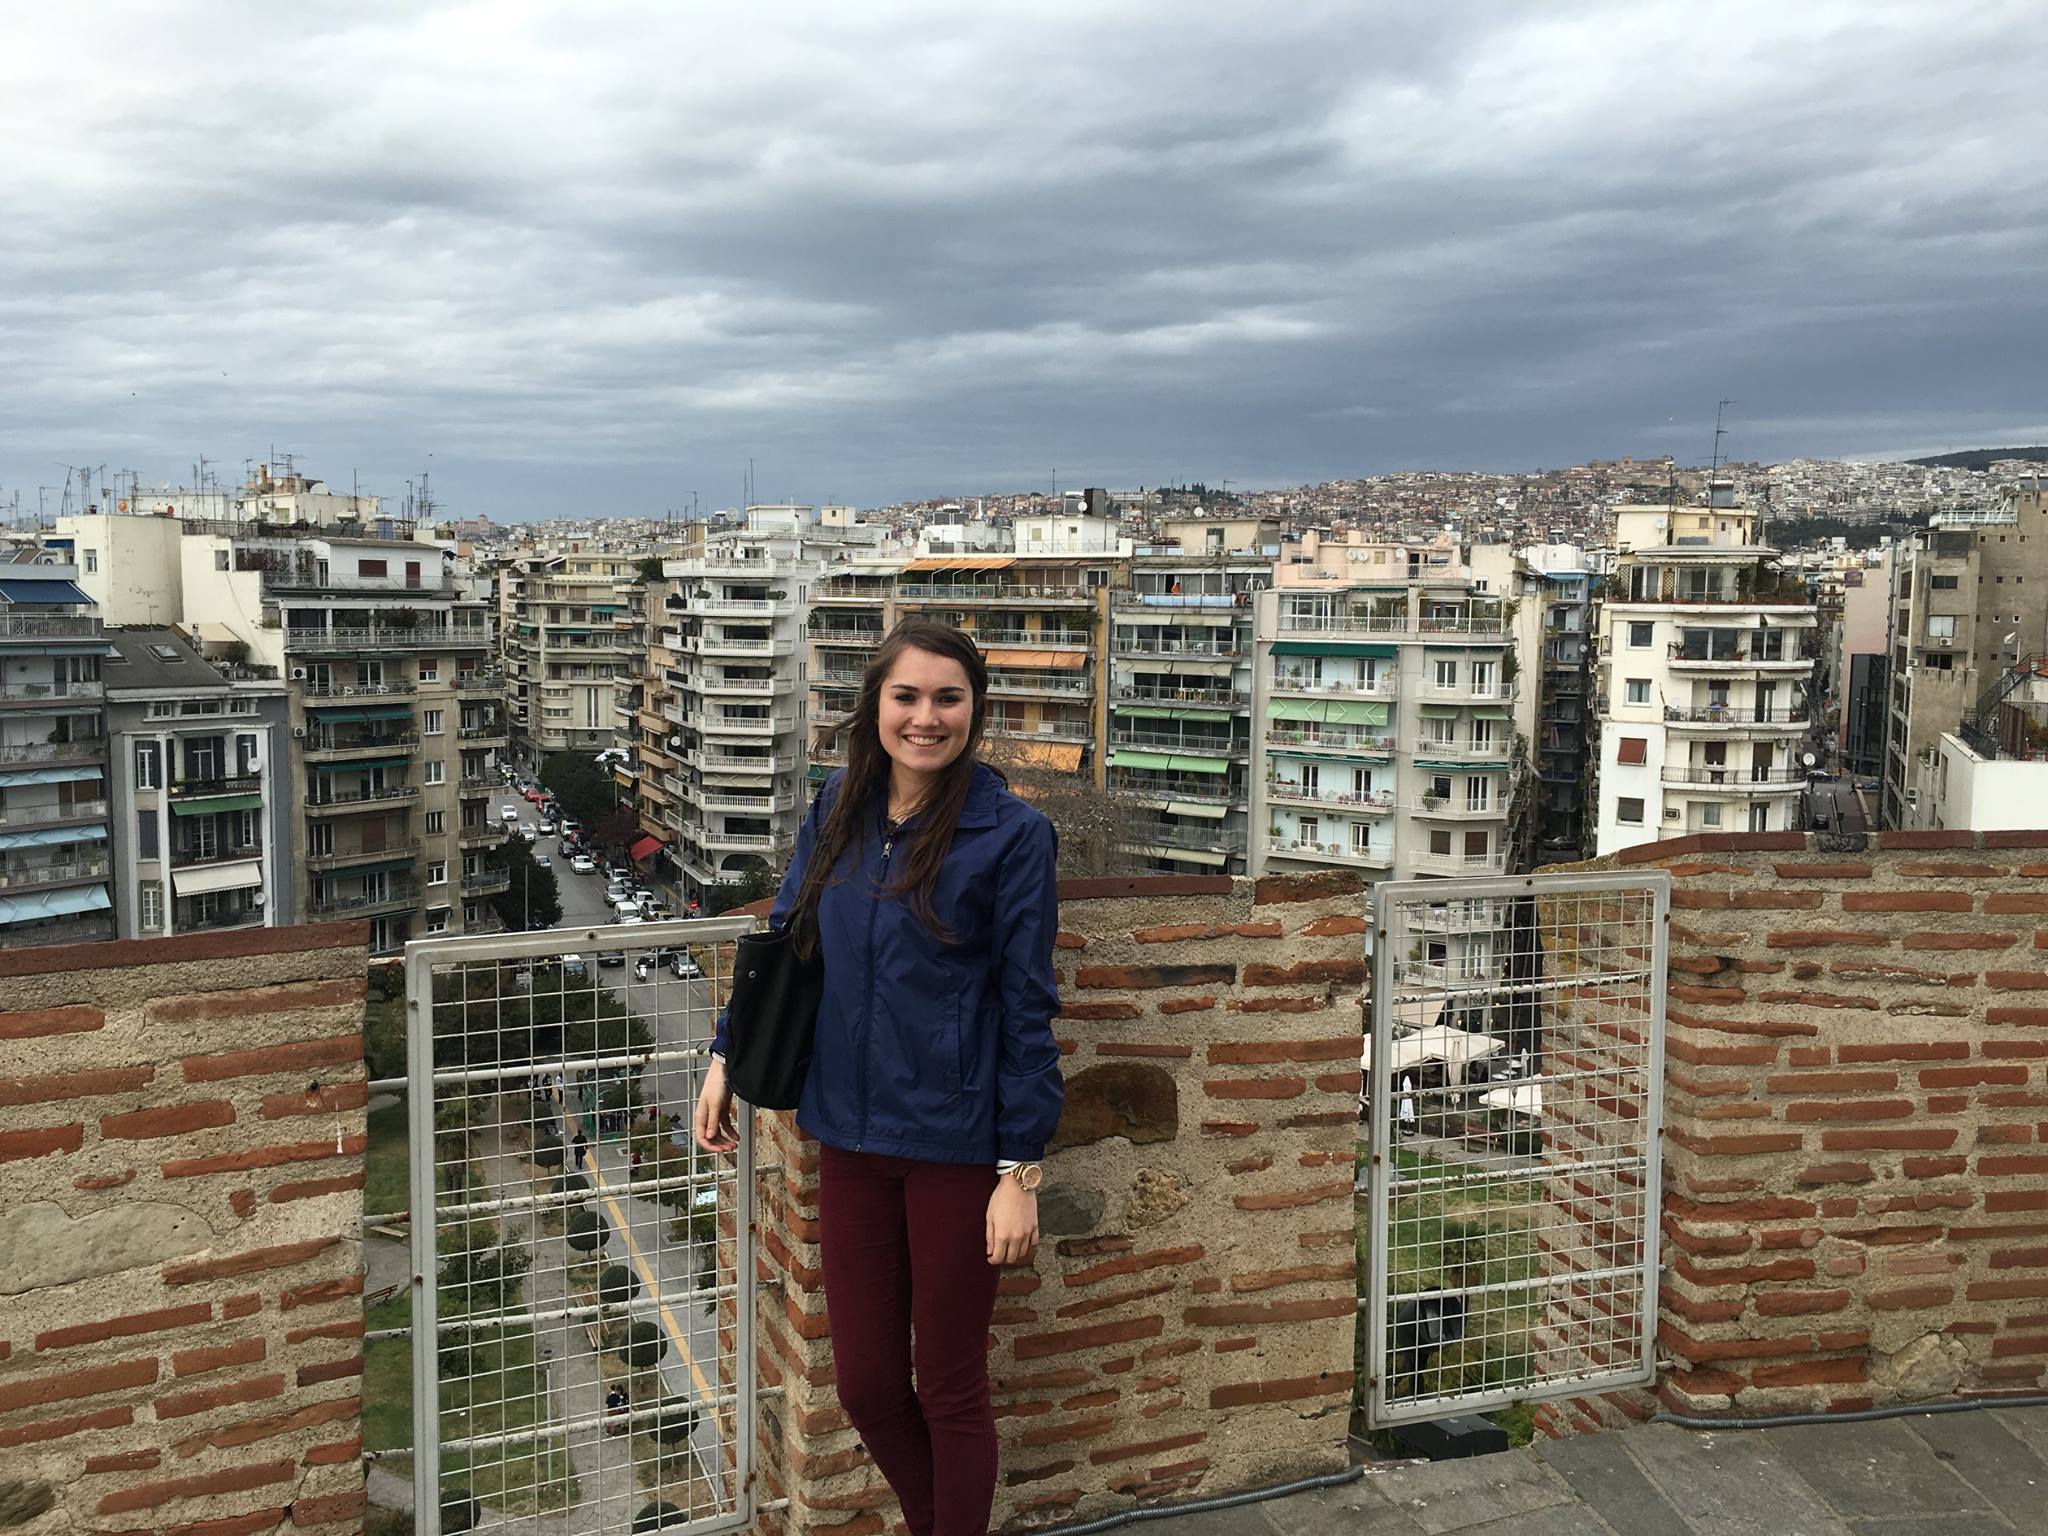 Writer, Chloe Dyer, atop the White Tower in Thessaloniki, Greece. Photo courtesy Chloe Dyer.